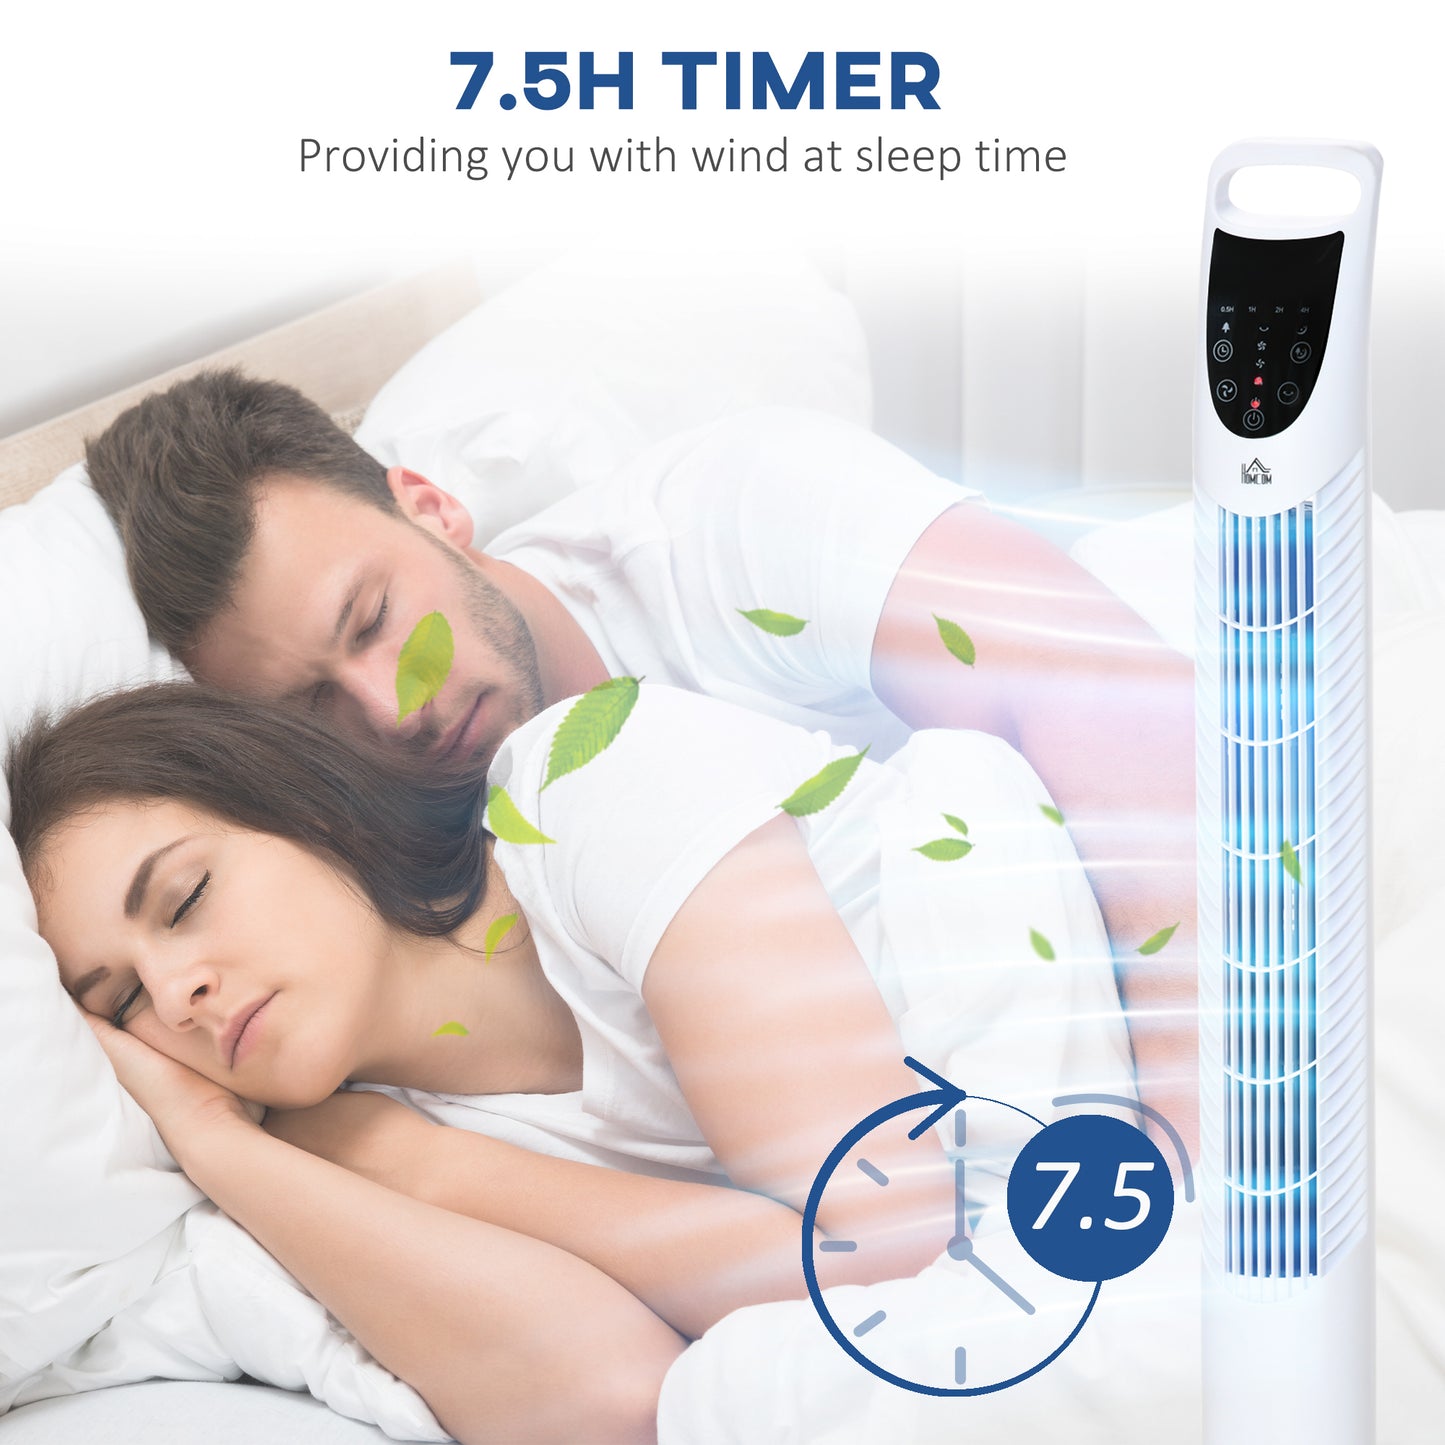 HOMCOM Tower Fan, 36'', with 3 Speeds, 3 Modes, 7.5h Timer, 70鎺?Oscillation, LED Control Panel, Remote Control, White